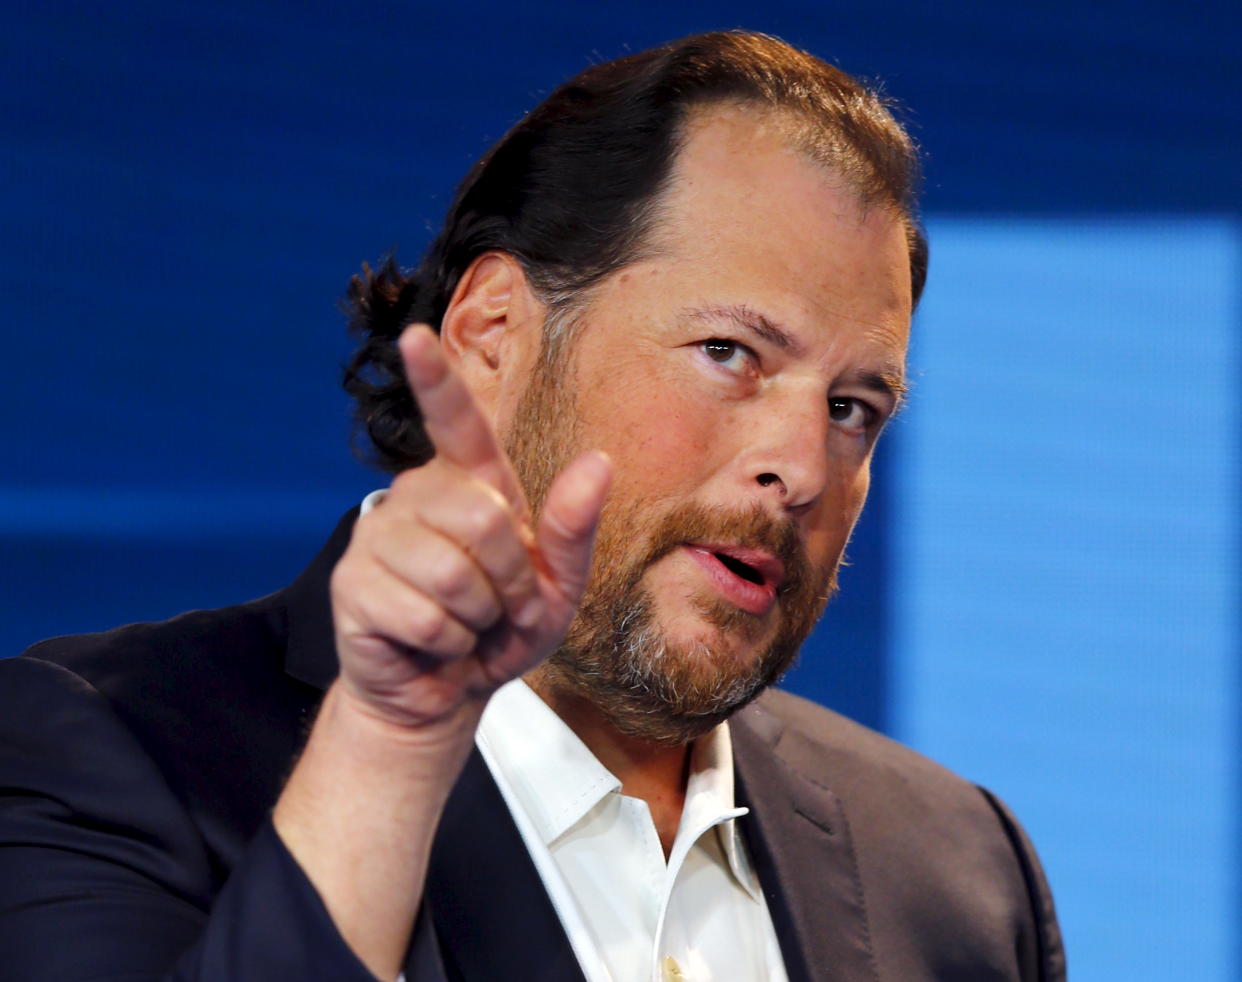 Marc Benioff, chairman and CEO of Salesforce speaks at the Wall Street Journal Digital Live ( WSJDLive ) conference at the Montage hotel in Laguna Beach, California  October 20, 2015.      REUTERS/Mike Blake